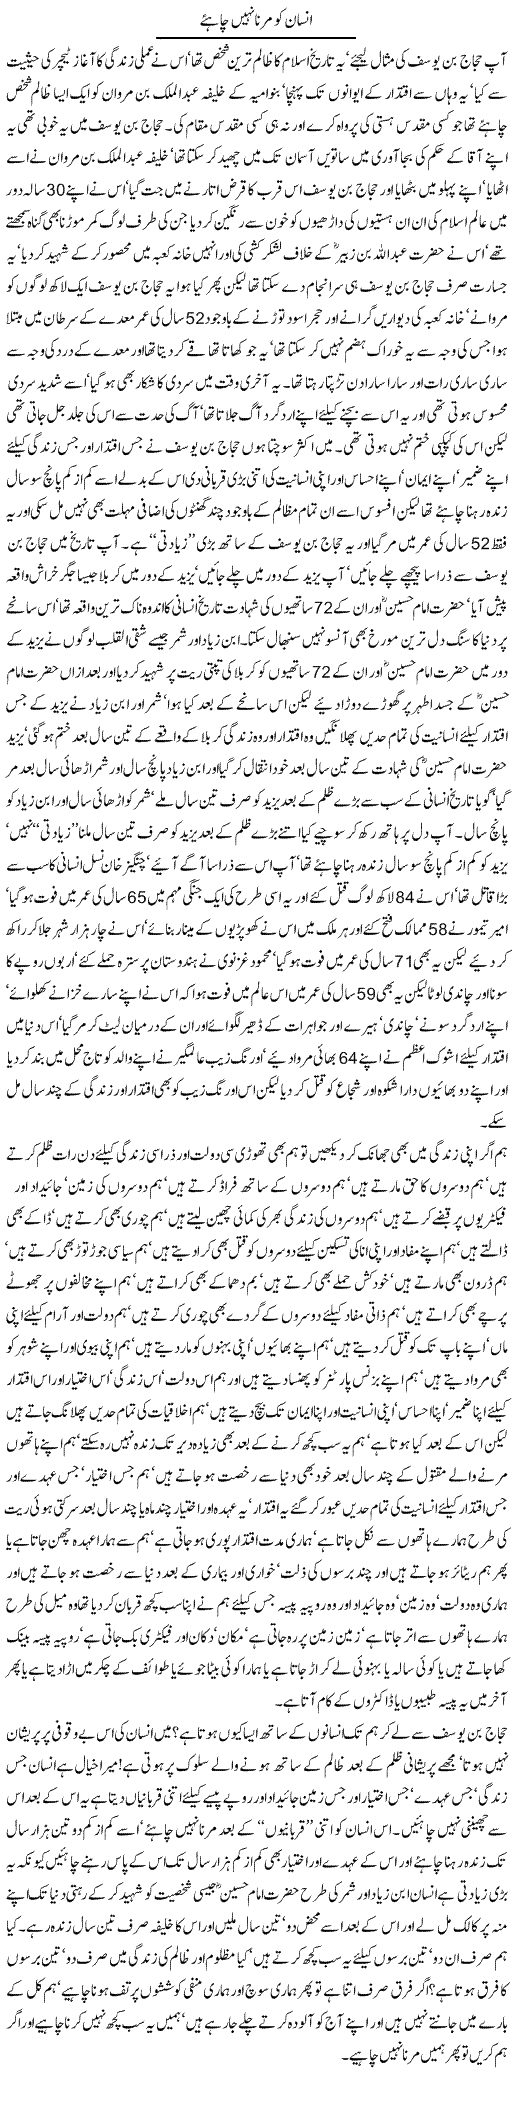 Death of Human Express Column Javed Chaudhry 12 June 2011